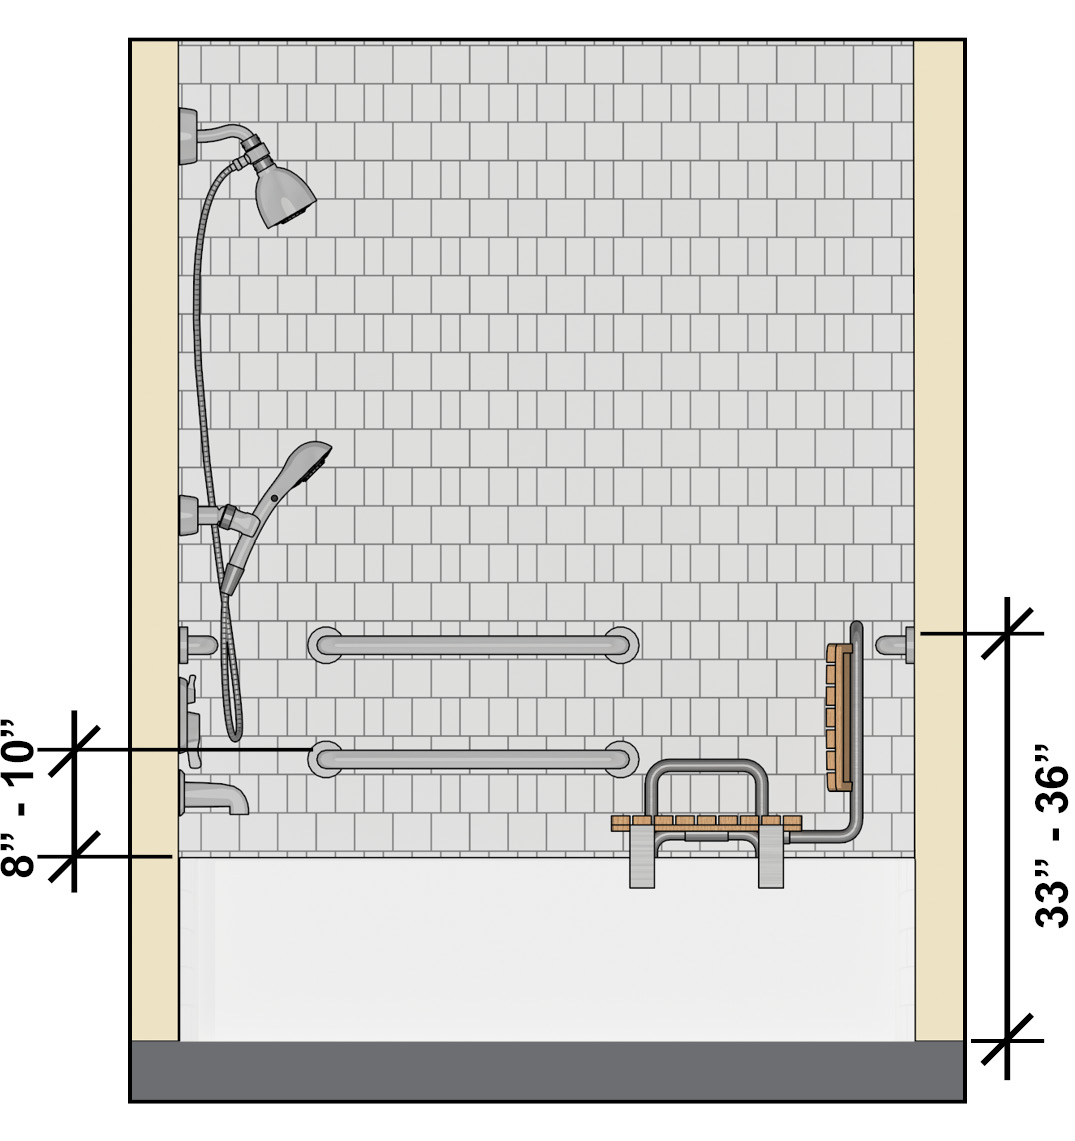 Tub grab bars 33 inches to 36 inches high; lower grab bar on back wall 8 inches to 10 inches
above bathtub rim